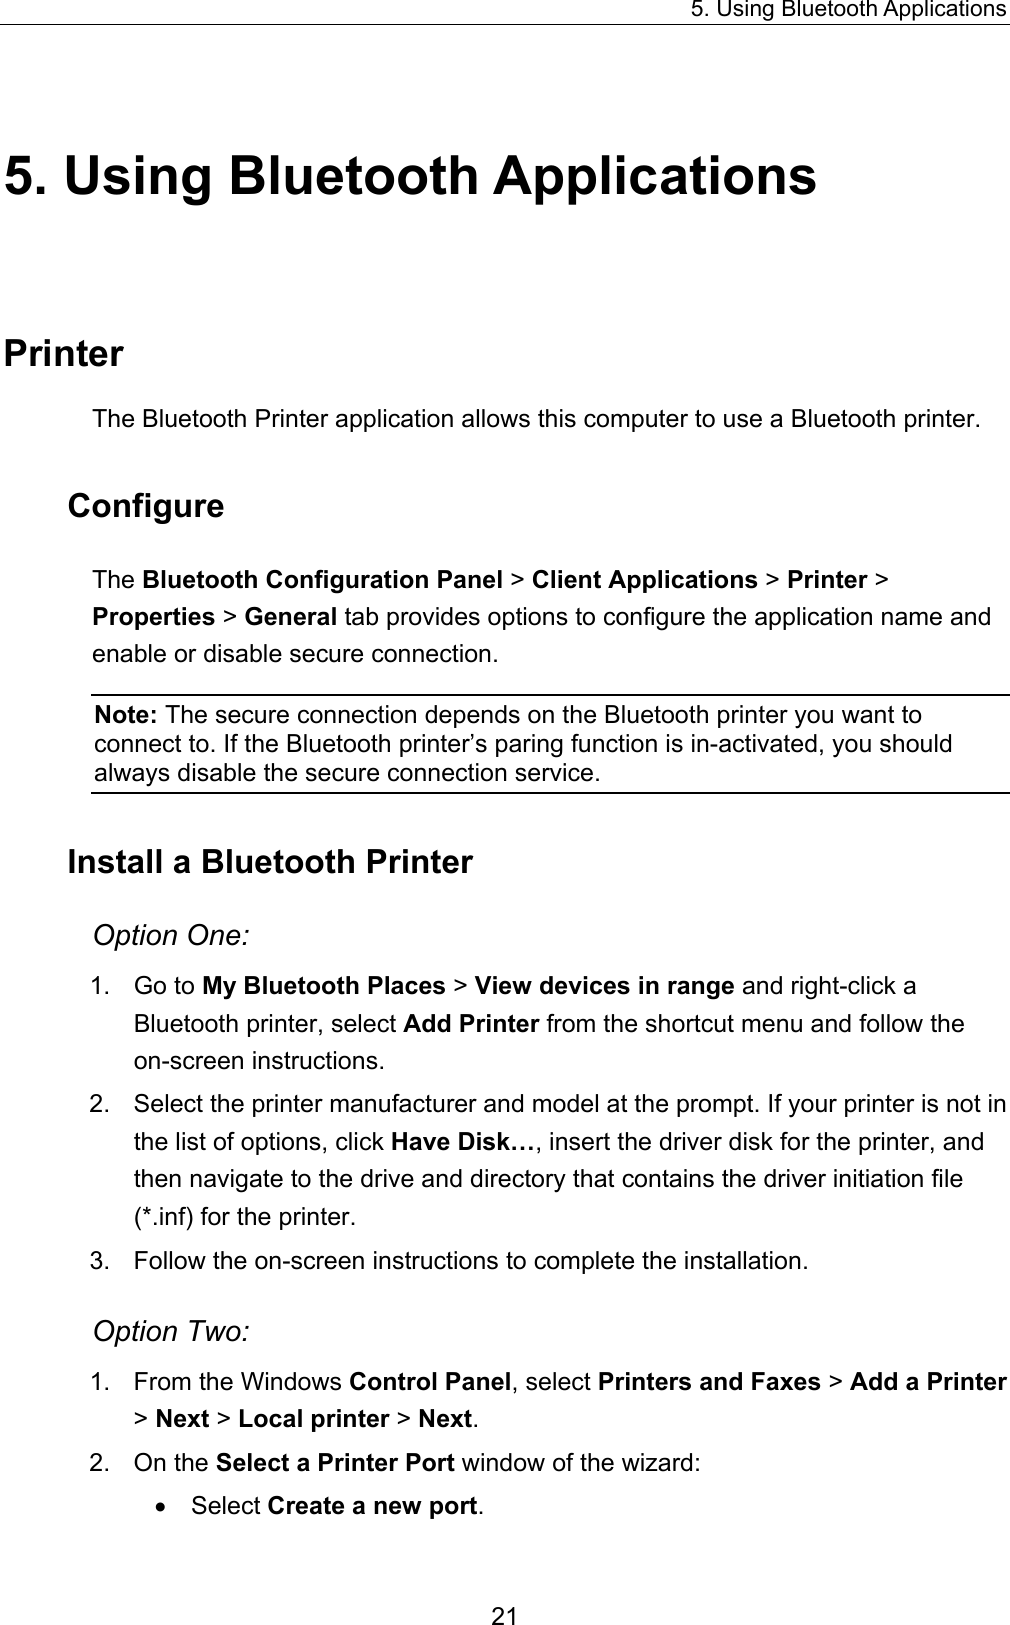 5. Using Bluetooth Applications 21 5. Using Bluetooth Applications Printer The Bluetooth Printer application allows this computer to use a Bluetooth printer.   Configure The Bluetooth Configuration Panel &gt; Client Applications &gt; Printer &gt; Properties &gt; General tab provides options to configure the application name and enable or disable secure connection.   Note: The secure connection depends on the Bluetooth printer you want to connect to. If the Bluetooth printer’s paring function is in-activated, you should always disable the secure connection service. Install a Bluetooth Printer Option One: 1. Go to My Bluetooth Places &gt; View devices in range and right-click a Bluetooth printer, select Add Printer from the shortcut menu and follow the on-screen instructions. 2.  Select the printer manufacturer and model at the prompt. If your printer is not in the list of options, click Have Disk…, insert the driver disk for the printer, and then navigate to the drive and directory that contains the driver initiation file (*.inf) for the printer. 3.  Follow the on-screen instructions to complete the installation. Option Two: 1.  From the Windows Control Panel, select Printers and Faxes &gt; Add a Printer &gt; Next &gt; Local printer &gt; Next. 2. On the Select a Printer Port window of the wizard: •  Select Create a new port. 